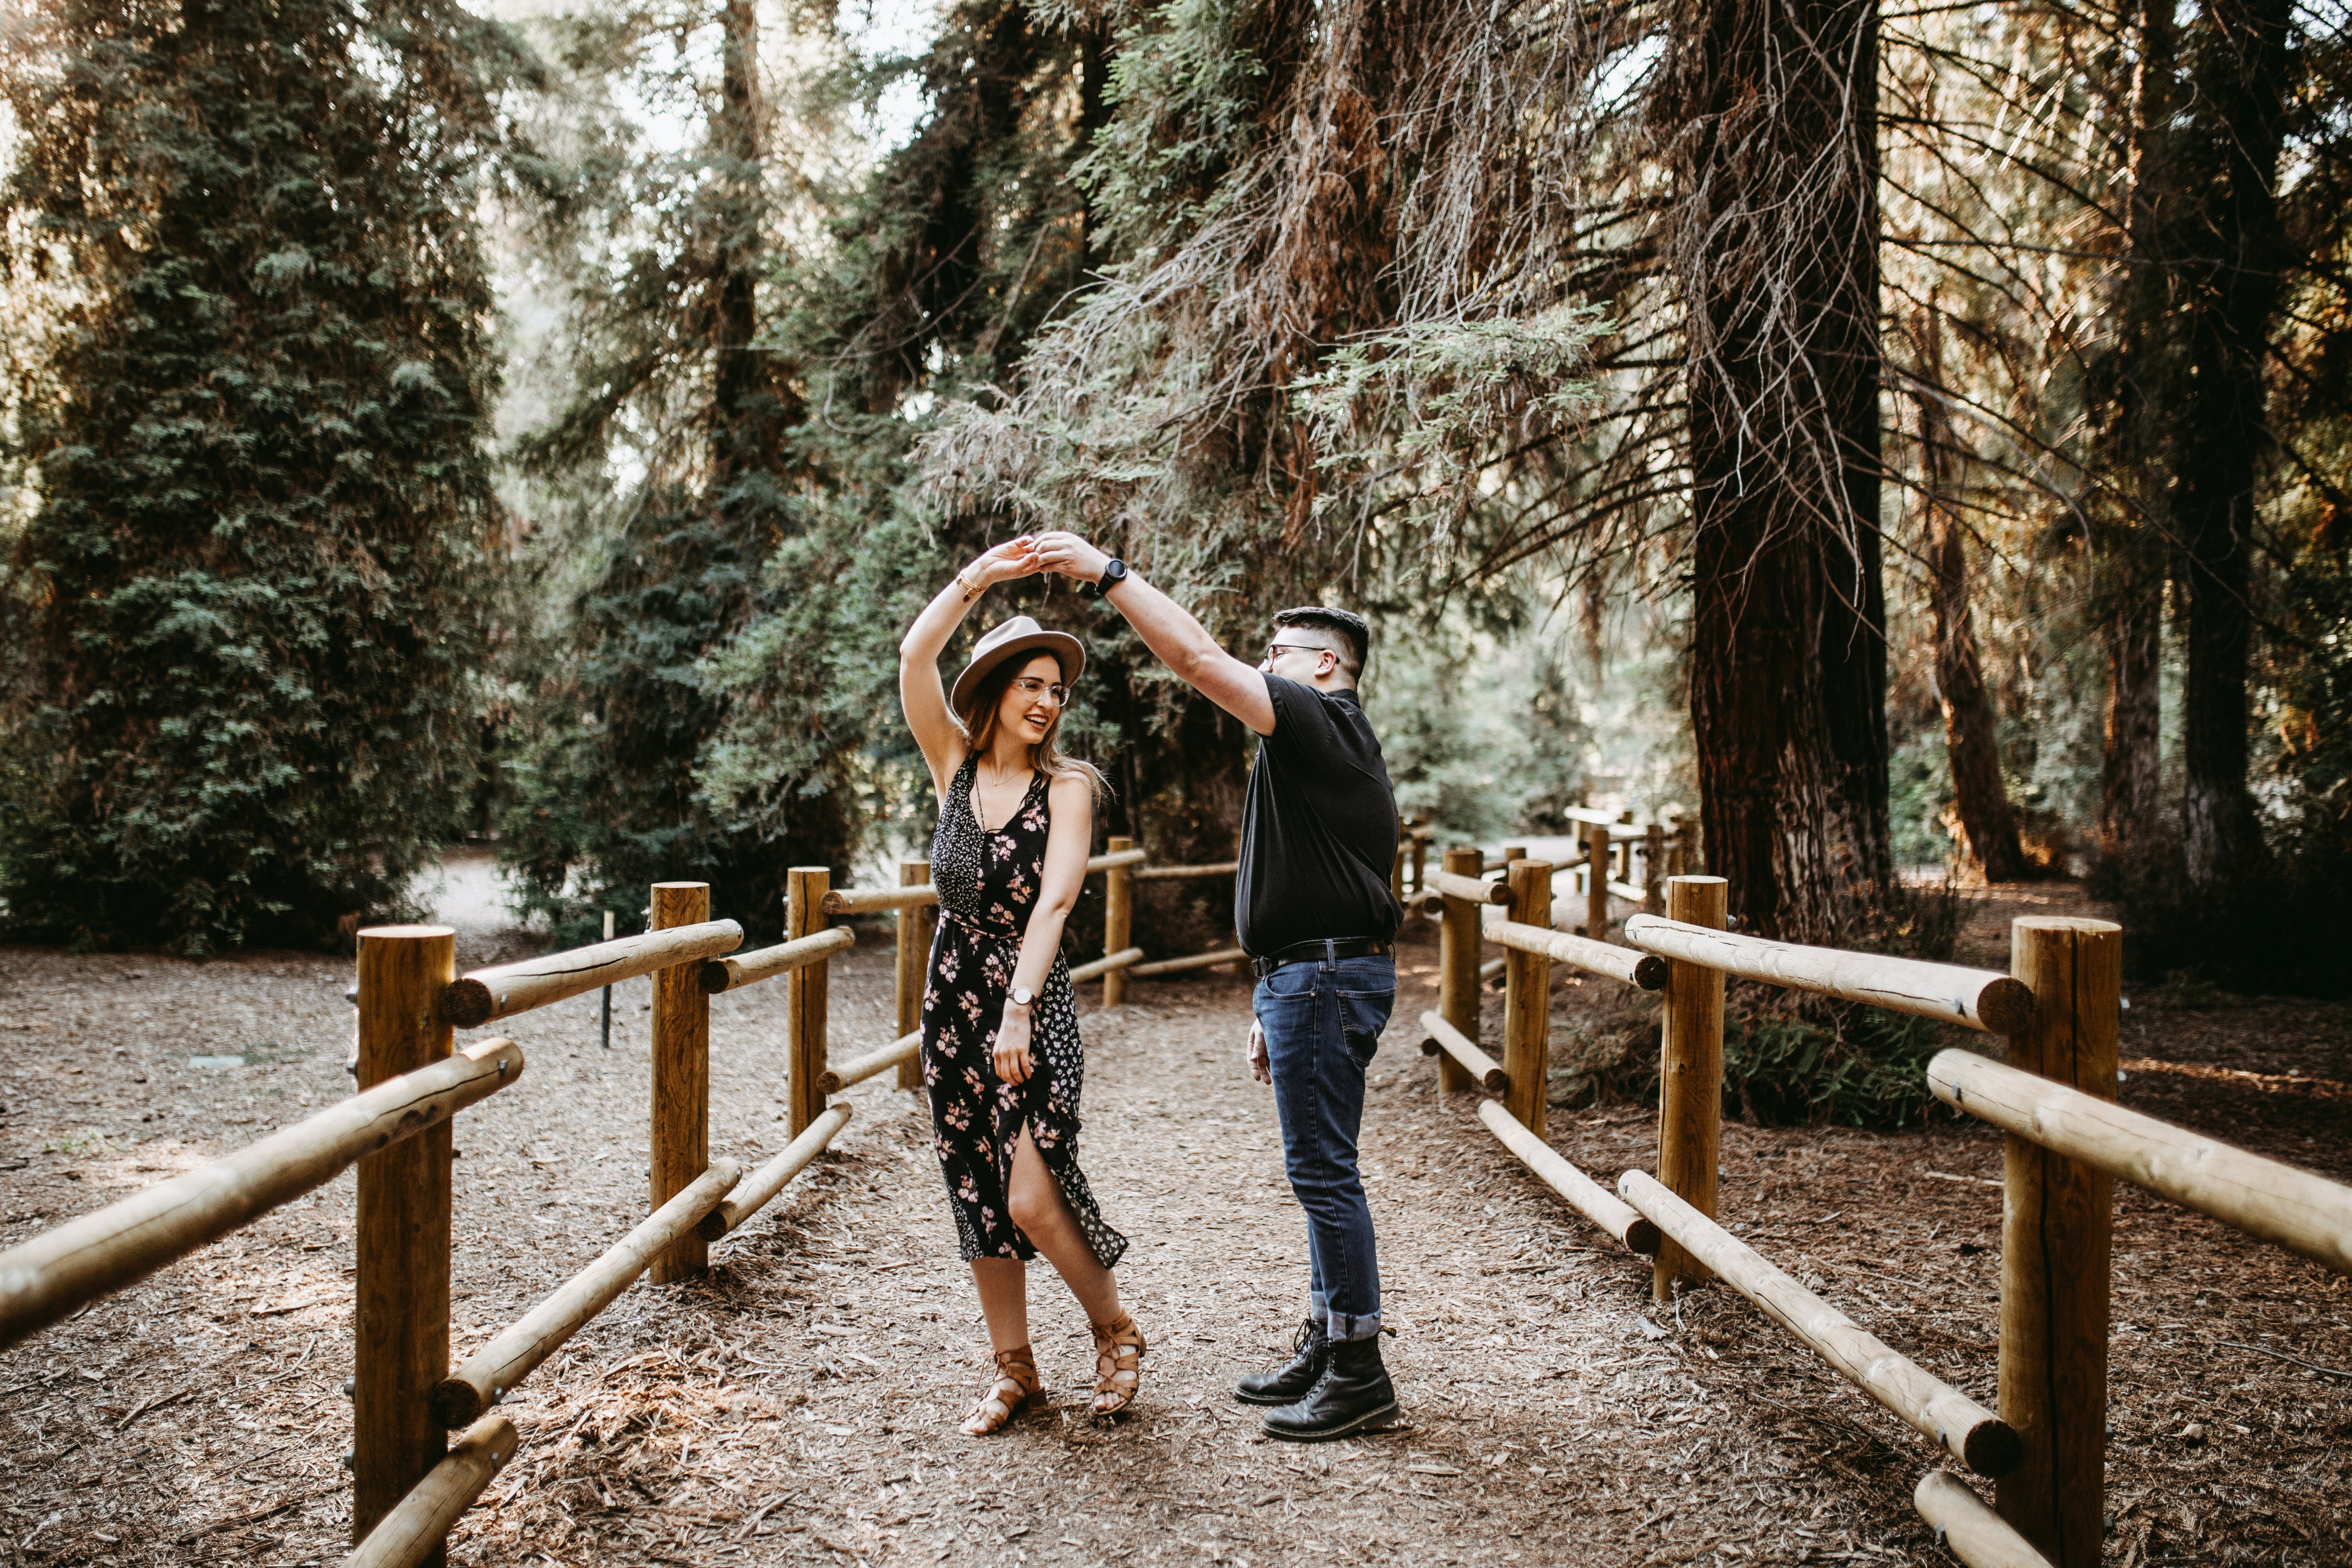 This shoot started as me just wanting to photograph a cool couple in a cool location. I had these awesome Redwoods in mind, but no couple! So, I posted on Facebook that I was looking for a couple to shoot, and Macarah responded that she and her boyfriend Adam would love to get some photos of them two. Score! Couple: Acquired. Fast forward to the night before our shoot. I got a message from Adam saying he was going to PROPOSE! I think I was more excited than he was.